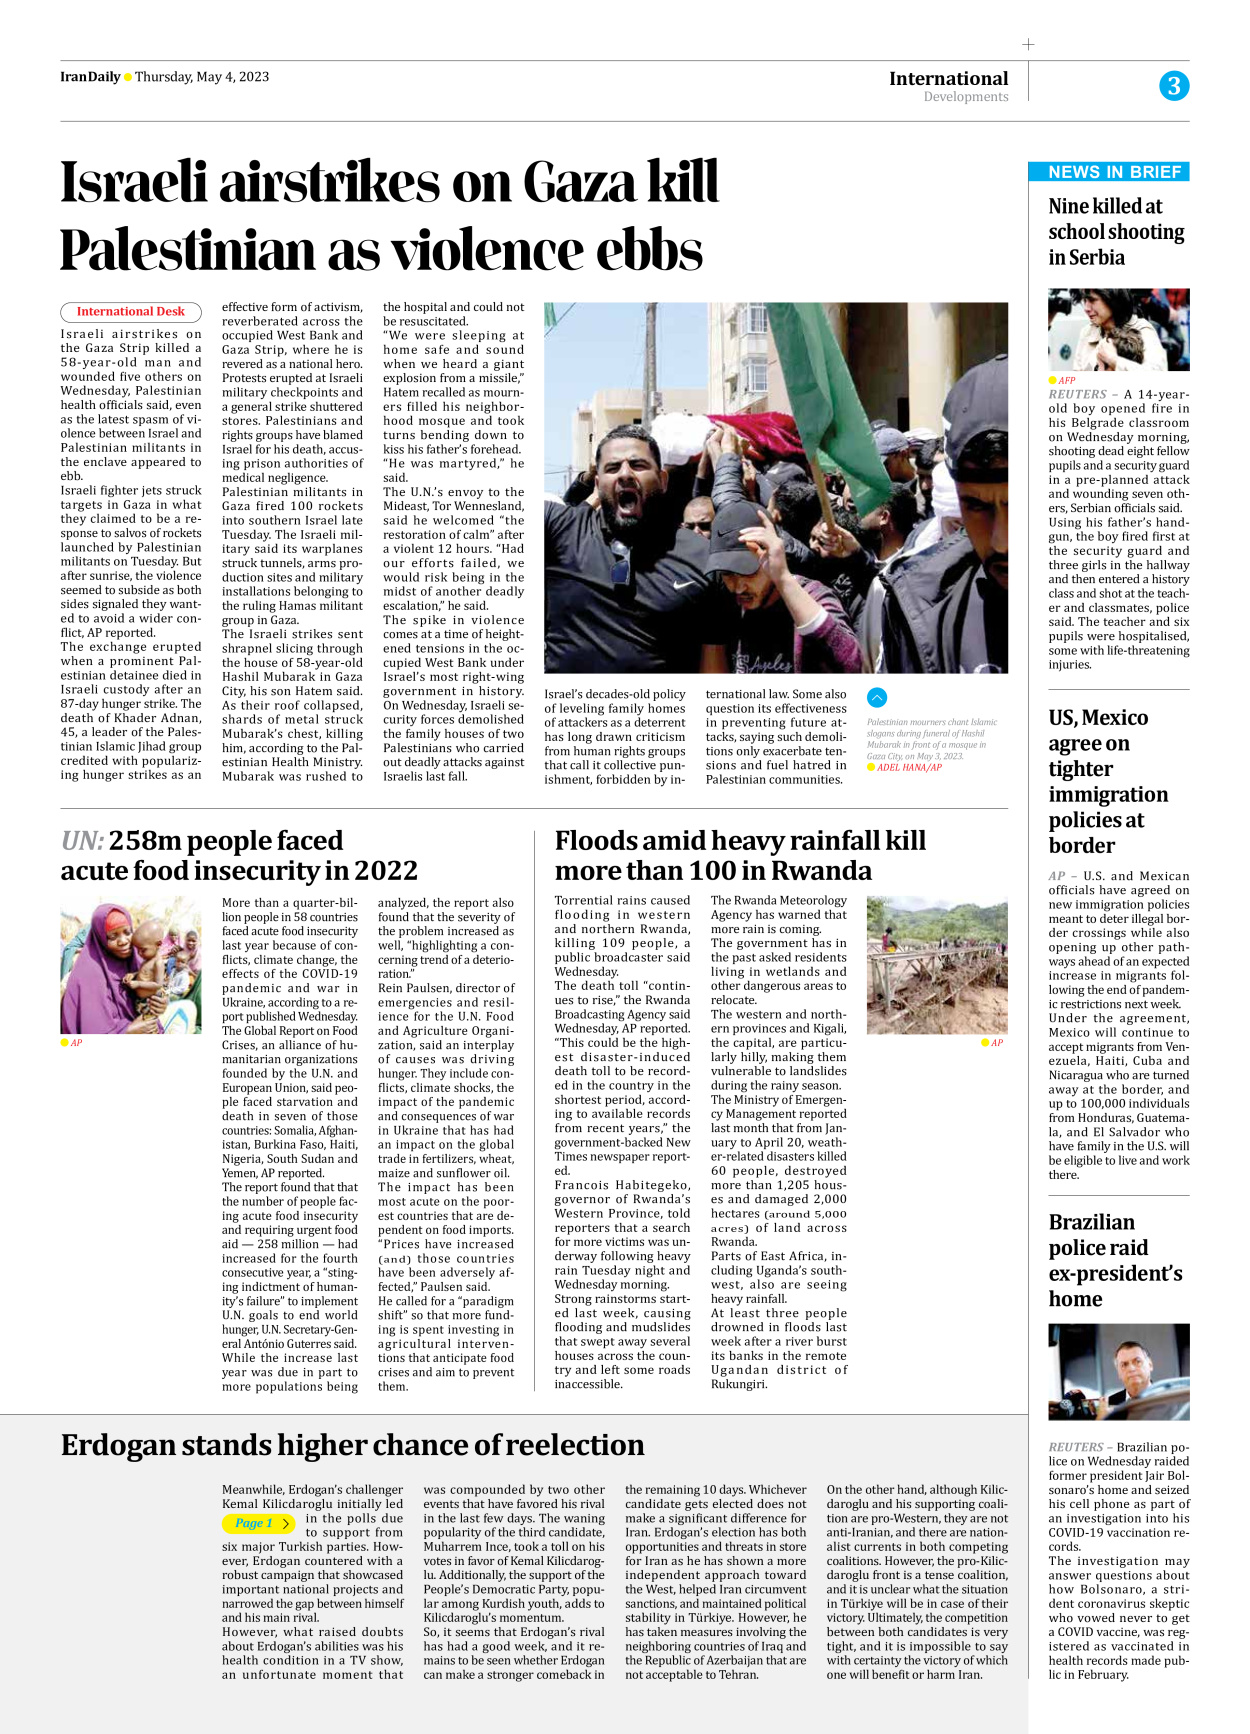 Iran Daily - Number Seven Thousand Two Hundred and Eighty Three - 04 May 2023 - Page 3